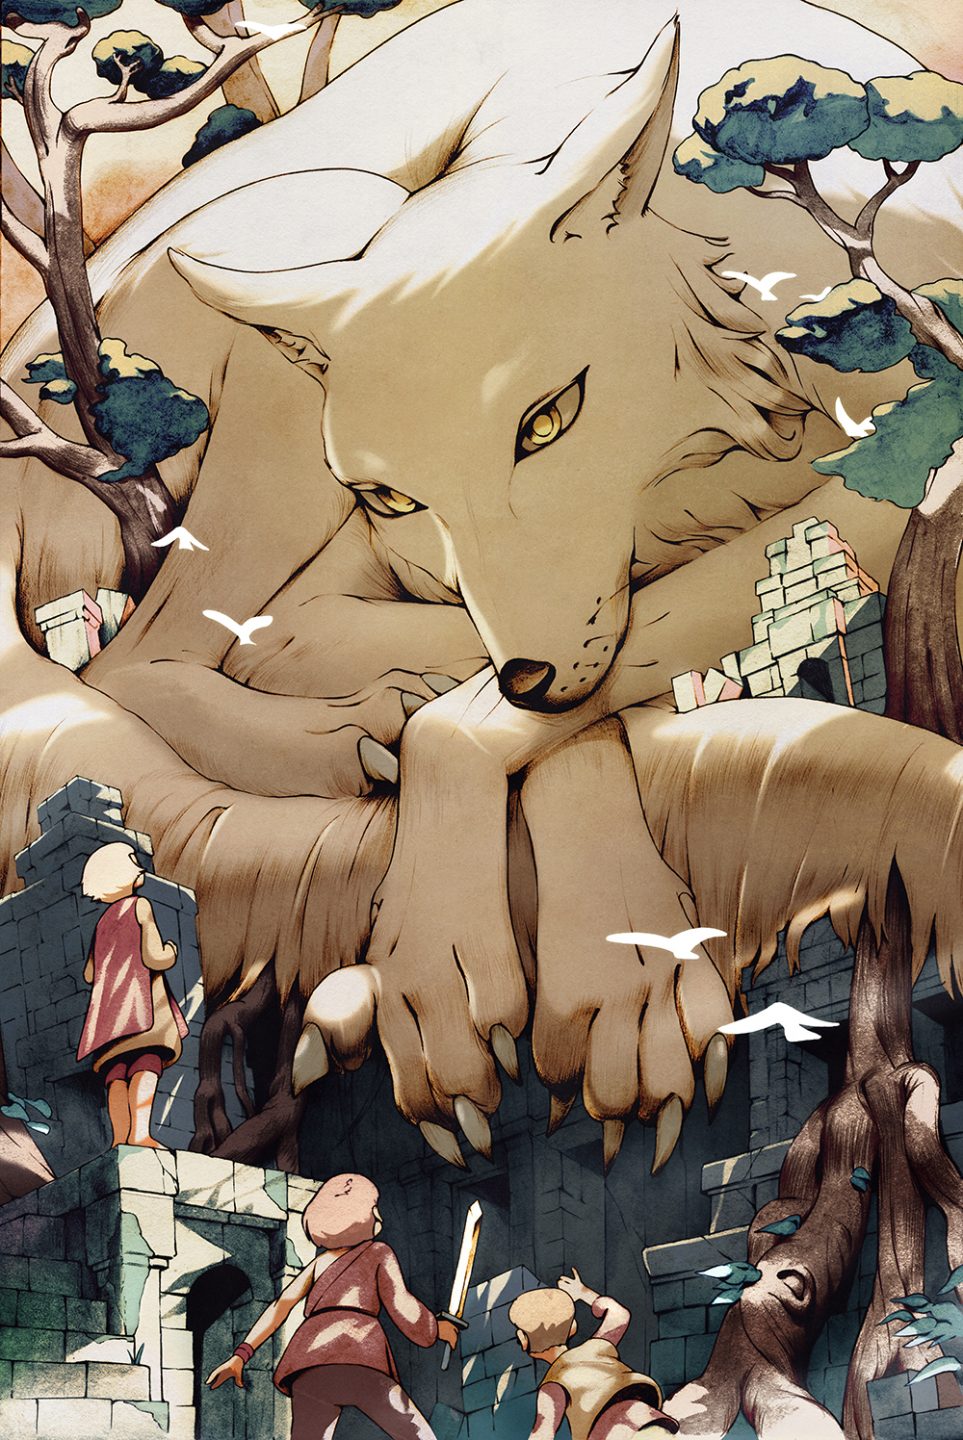 Artist of the Day: Kevin Hong